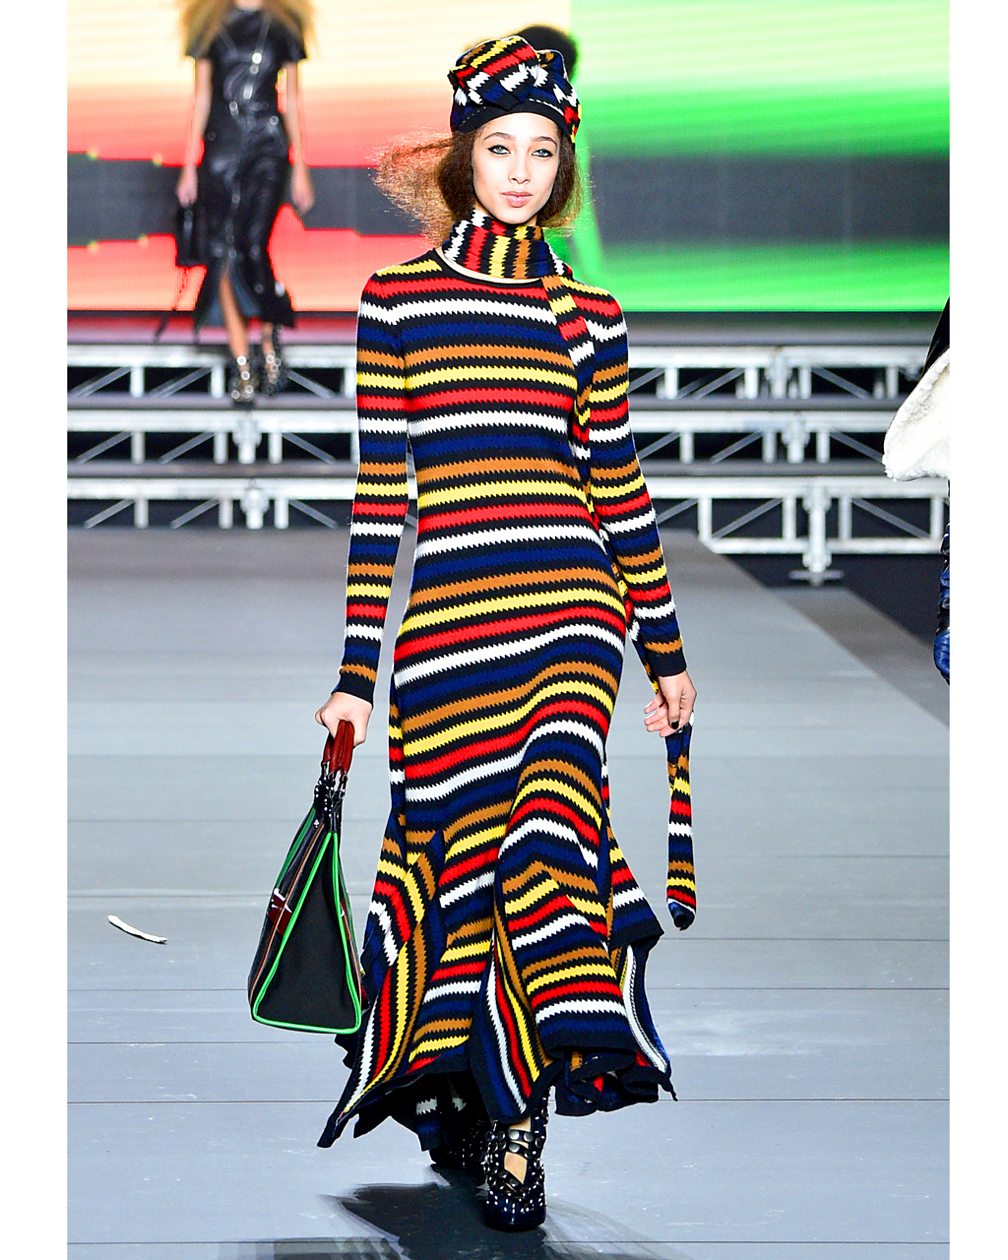 Getty Images Sonia Rykiel is among the big-name designers who specialise in knitwear, as seen here at a recent Paris Fashion Week (Credit: Getty Images)